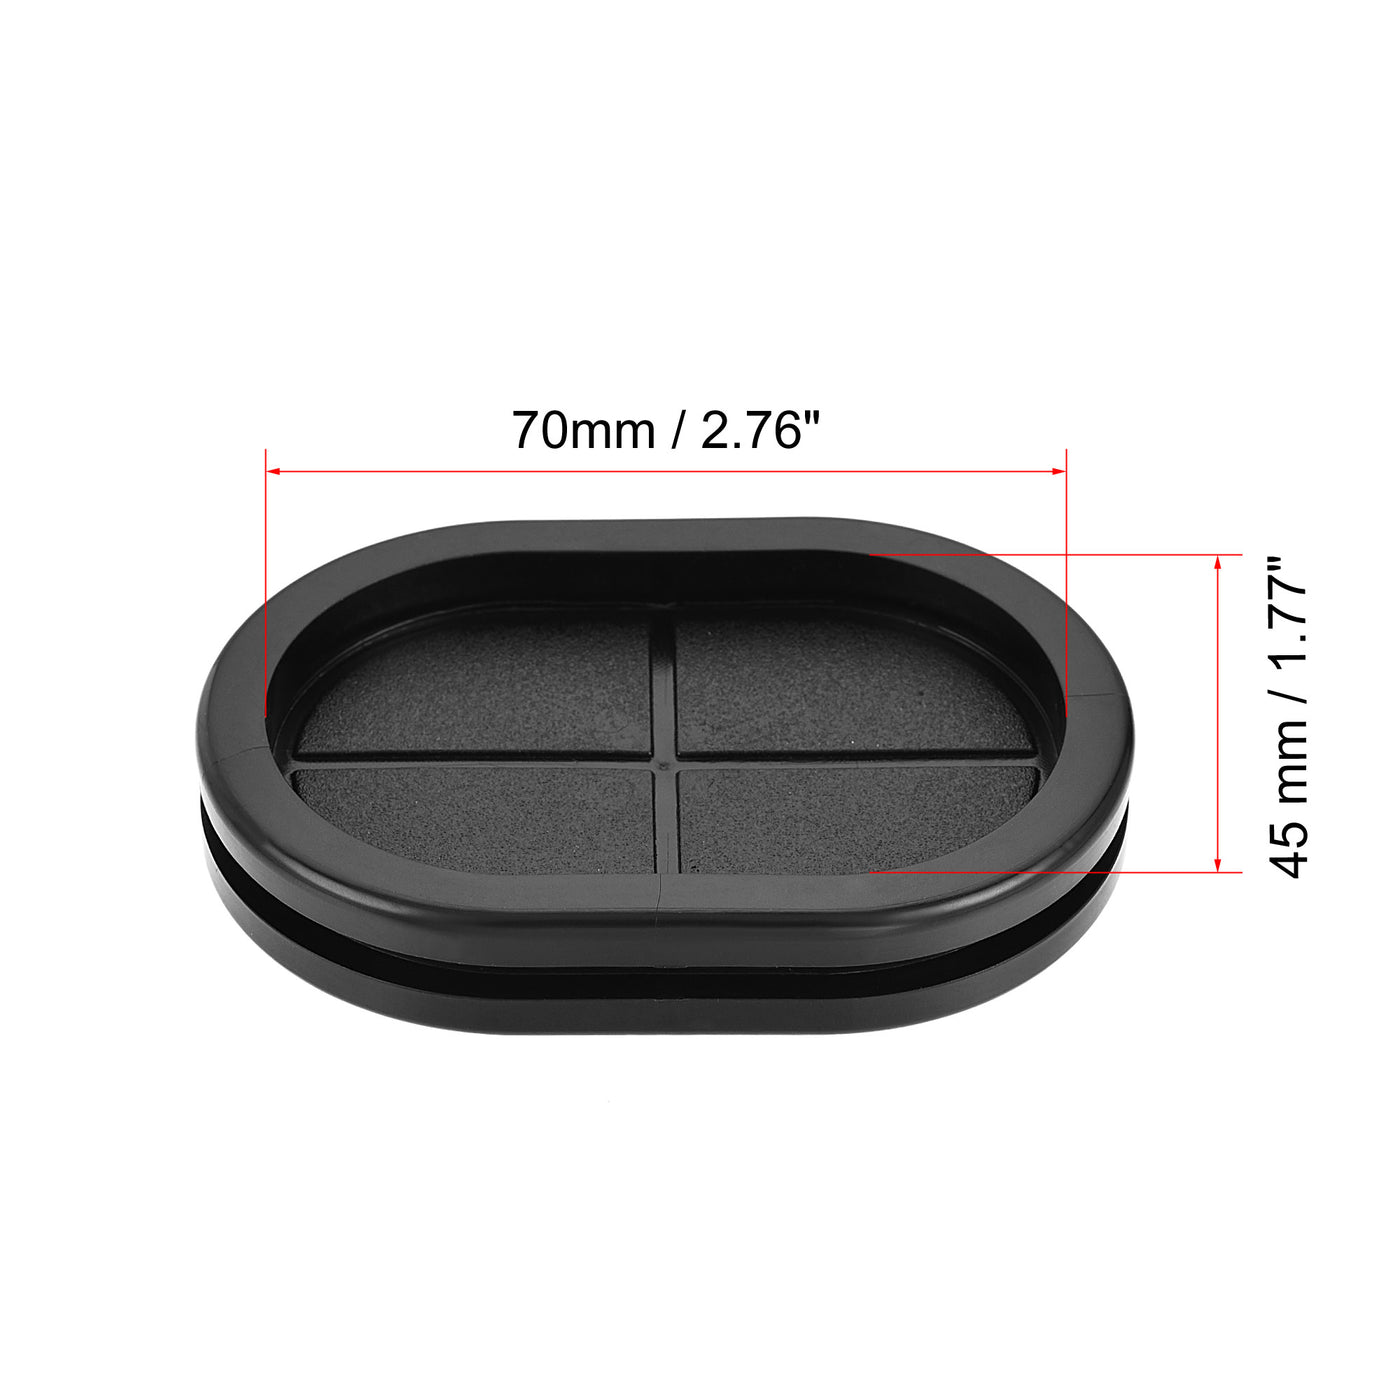 Uxcell Uxcell Rubber Grommet Oval Double-Sided Mount Size 35 x 20 mm for Wire Protection 4pcs